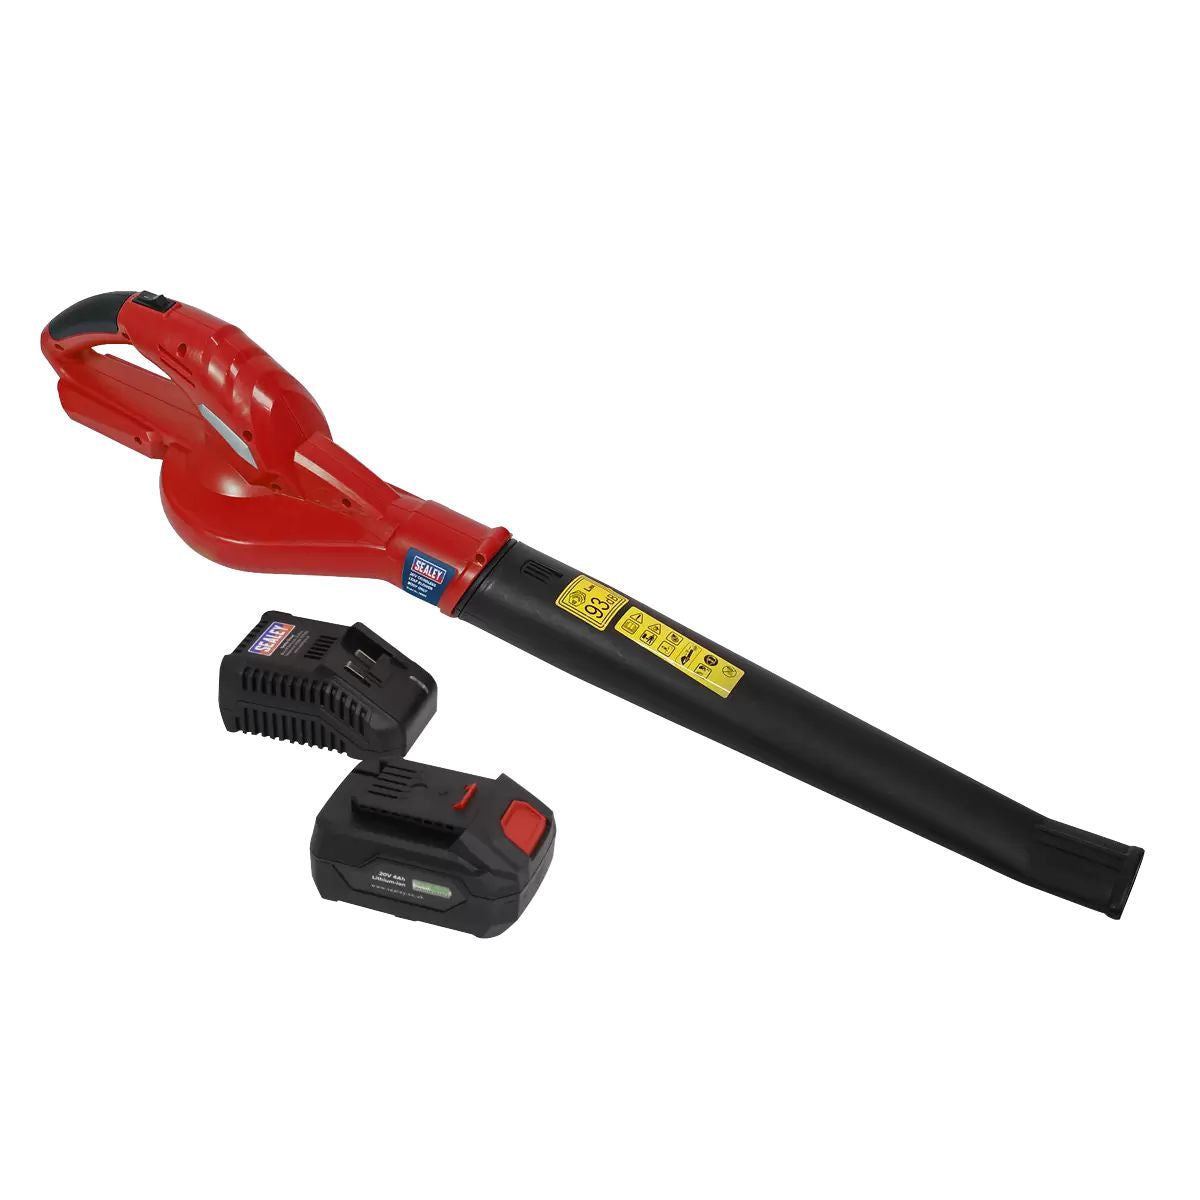 Sealey CB20VCOMBO4 Leaf Blower Cordless 20V with 1 x 4Ah Battery & Charger